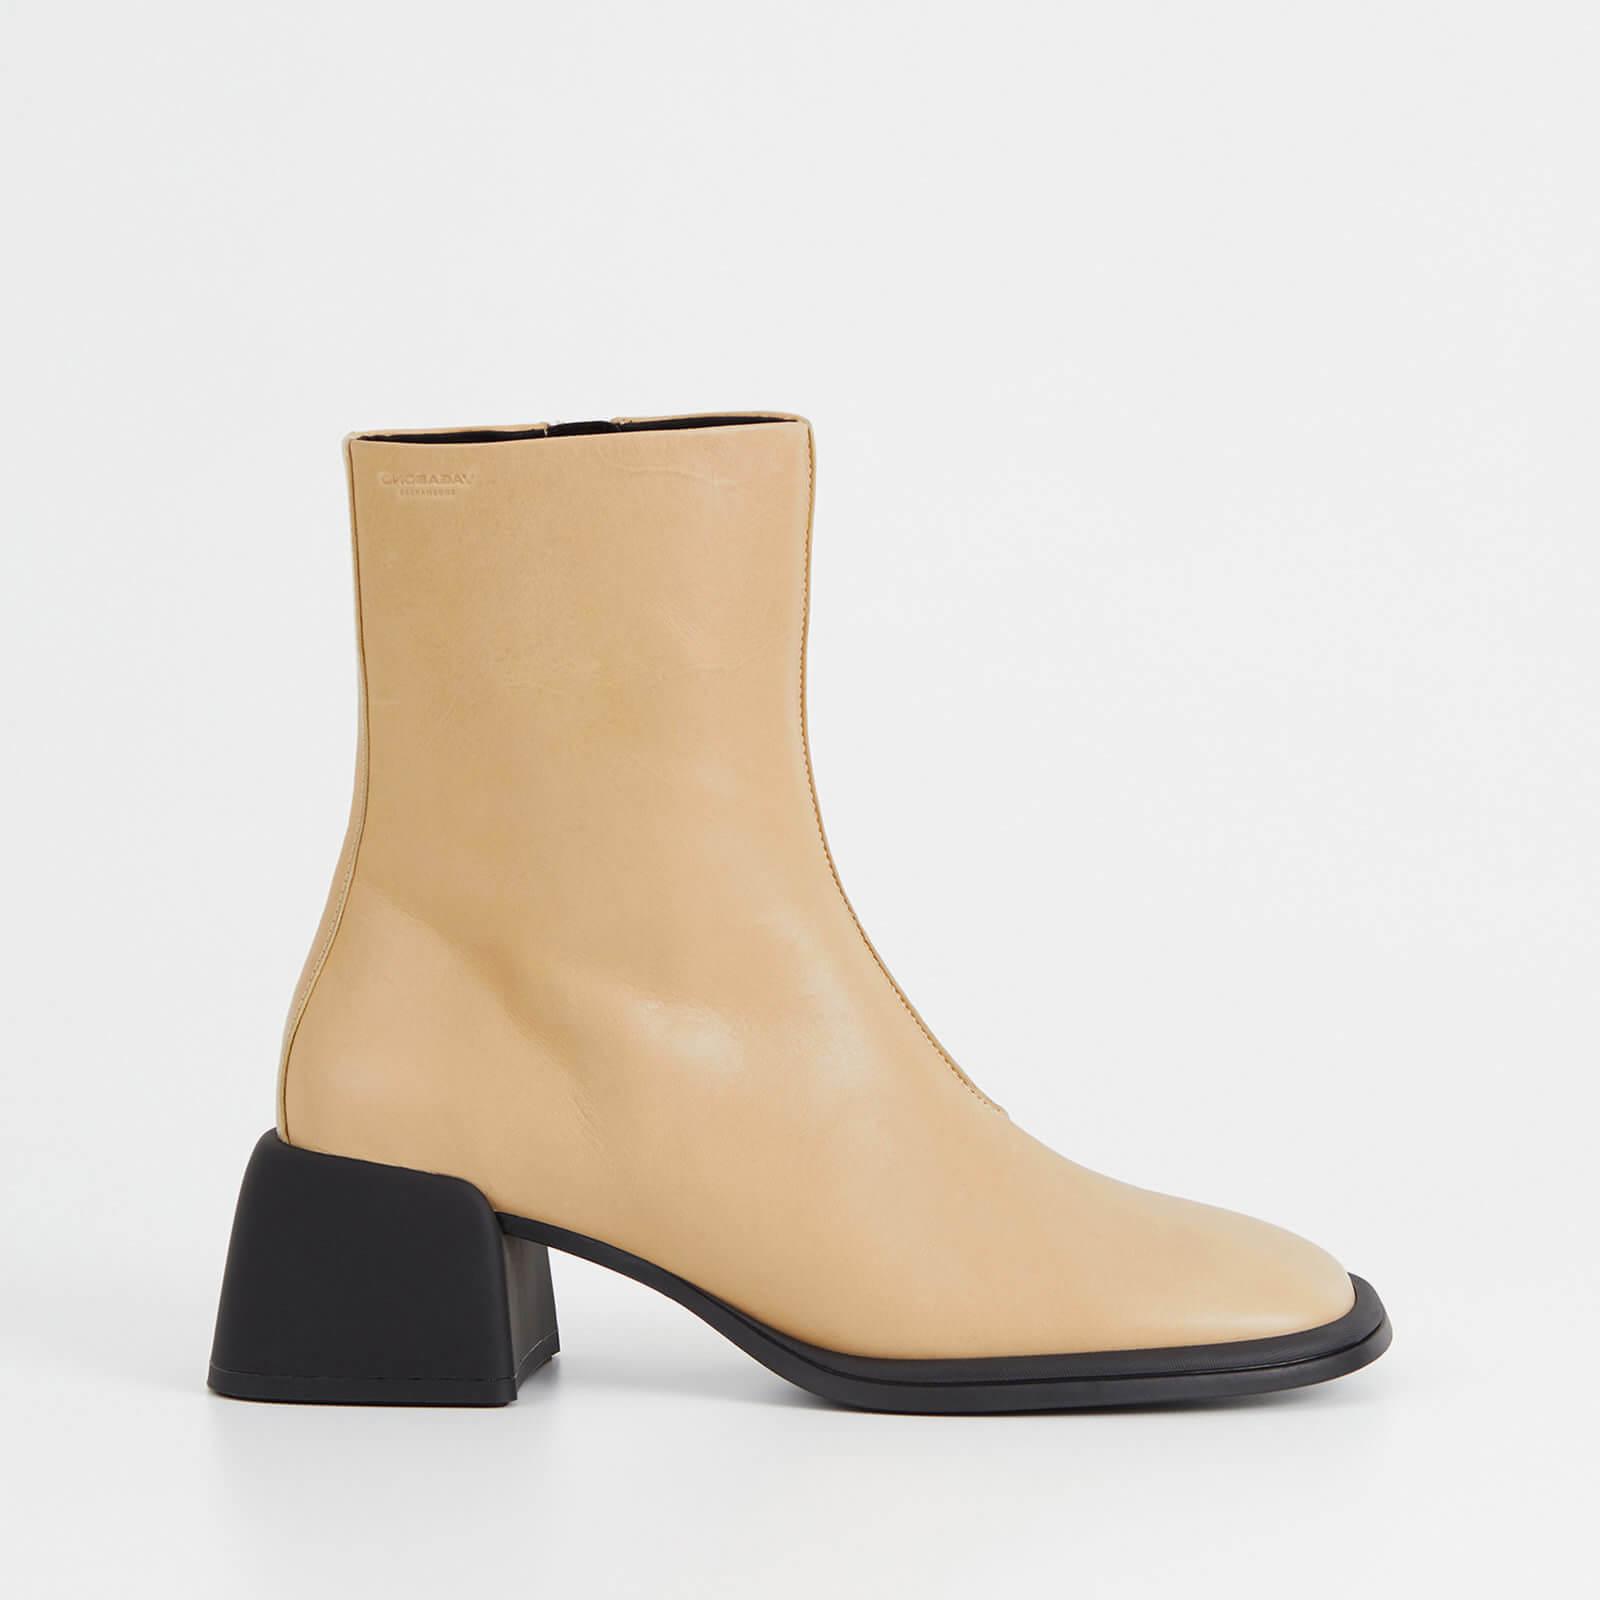 Vagabond Shoemakers Ansie Flared Heel Leather Ankle Boots in Natural | Lyst